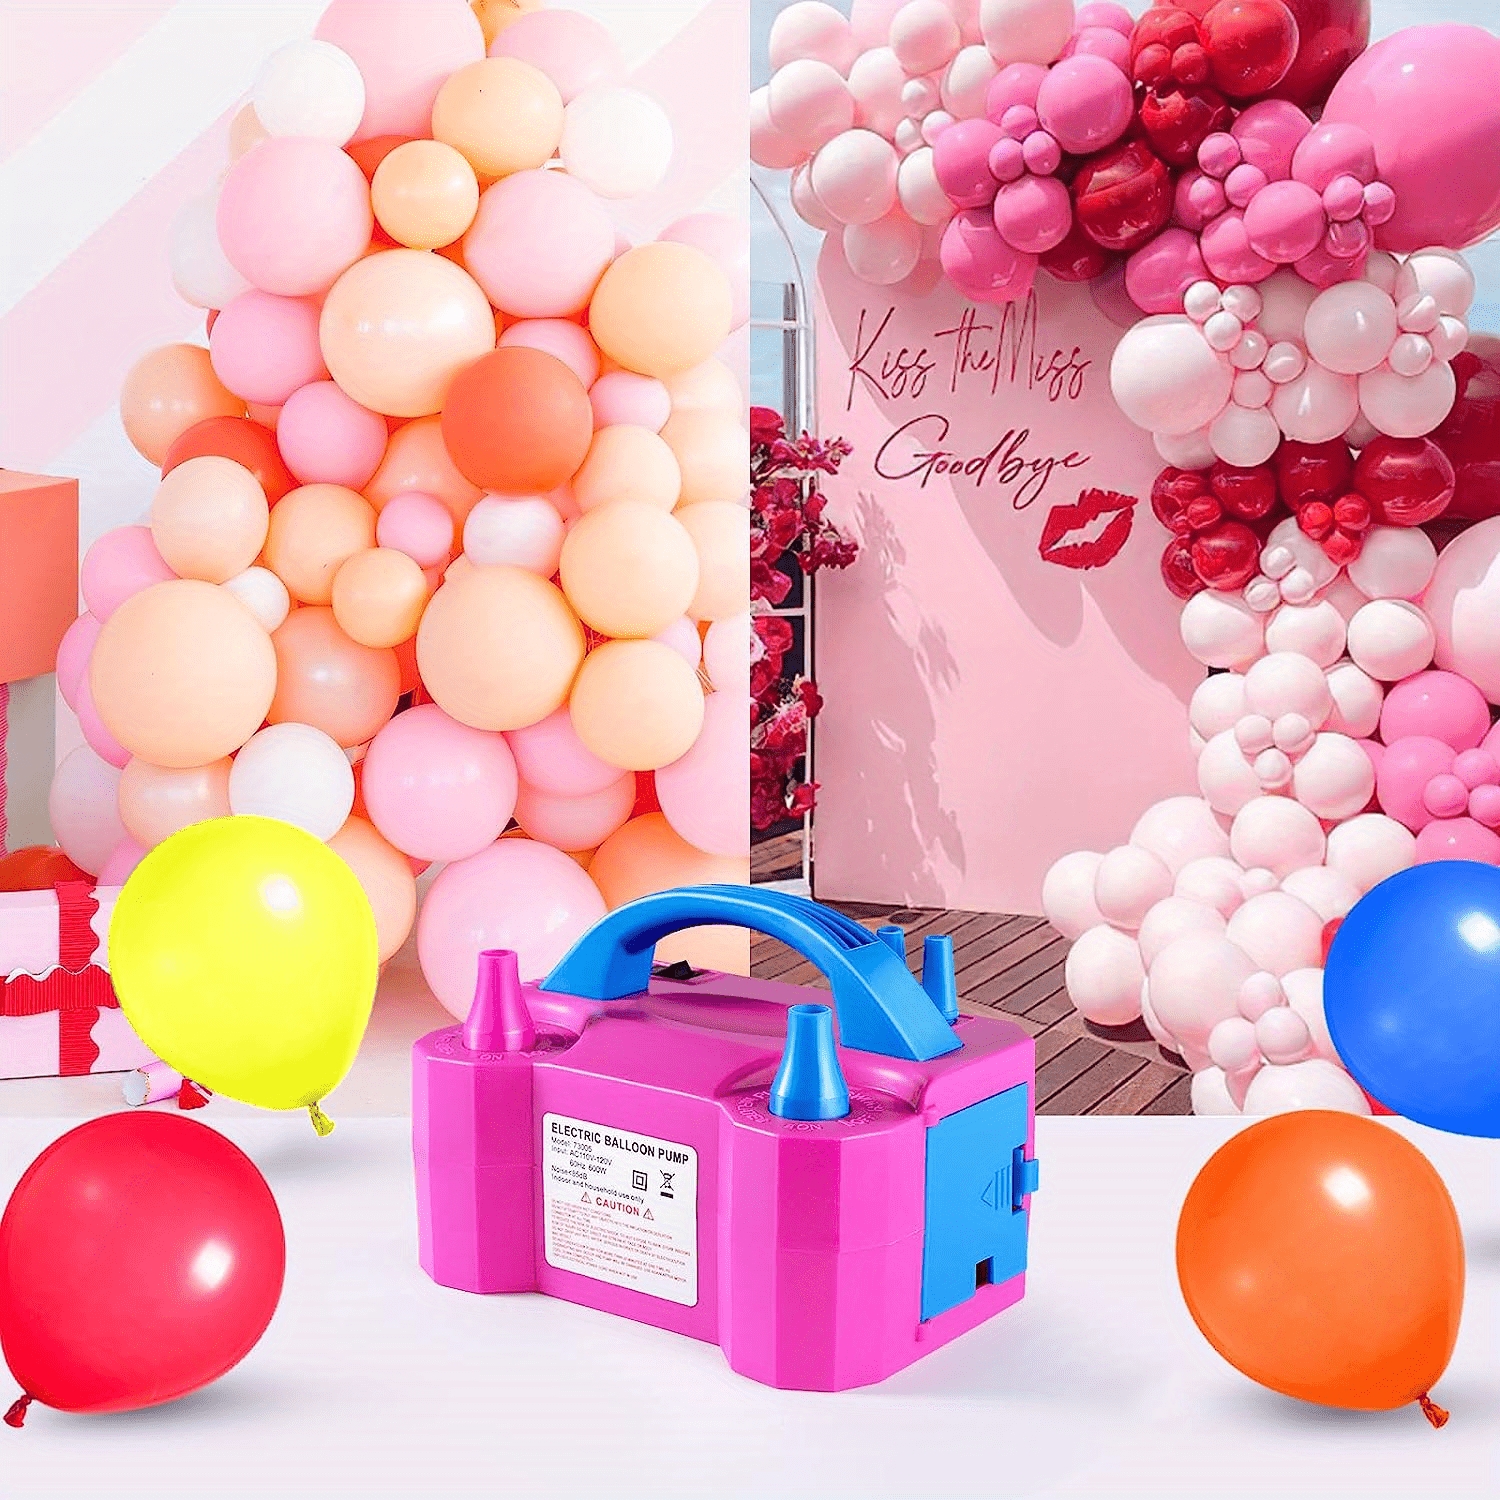  Electric Air Balloon Pump, AGPTEK 110V 600W Rose Red Portable  Dual Nozzle Inflator/Blower for Party Decoration : Childrens Party  Decorations : Sports & Outdoors